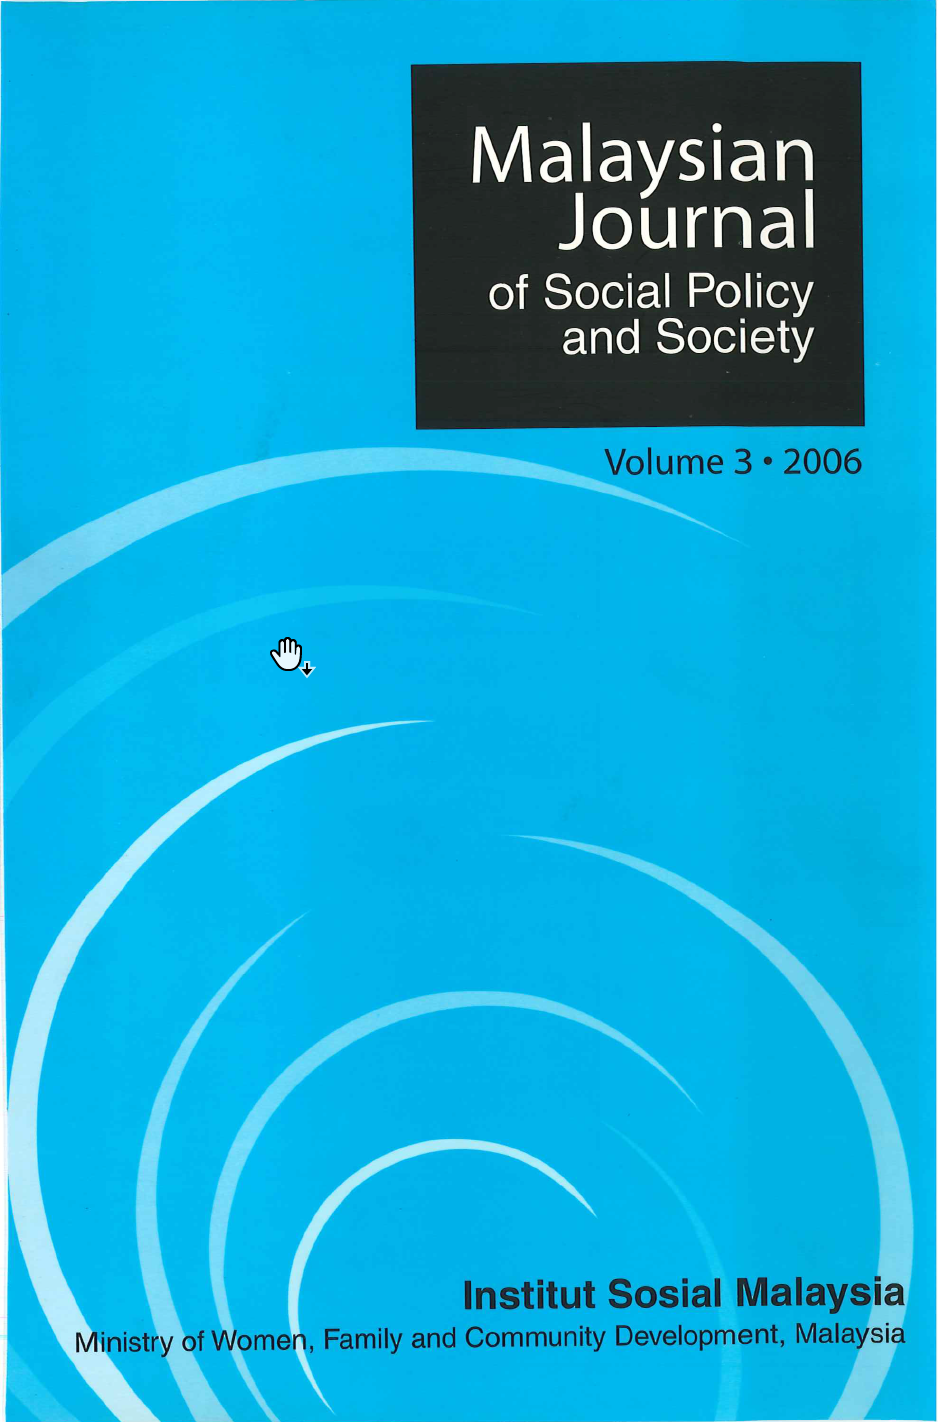 					View Vol. 3 (2006): Malaysian Journal of Social Policy and Society Volume 3 2006
				